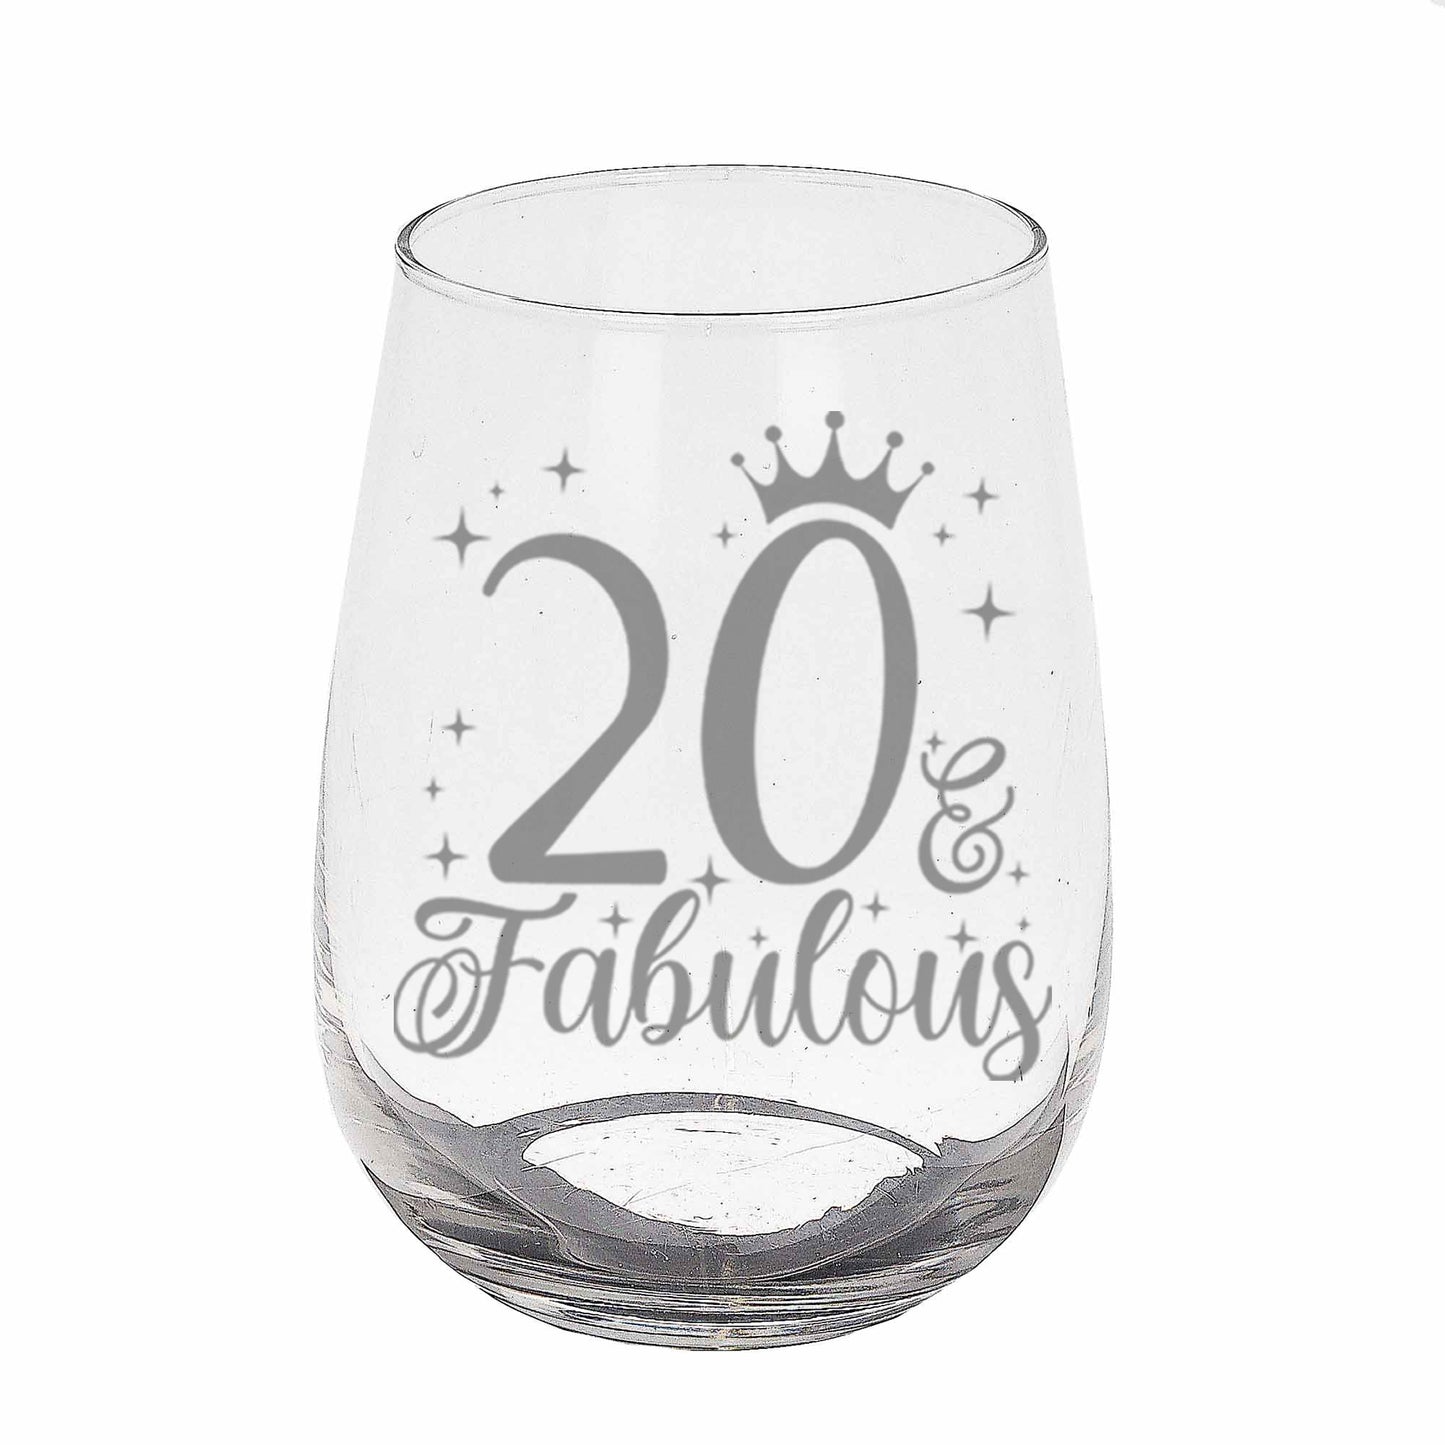 20 & Fabulous Engraved Stemless Gin Glass and/or Coaster Set  - Always Looking Good - Stemless Gin Glass On Its Own  